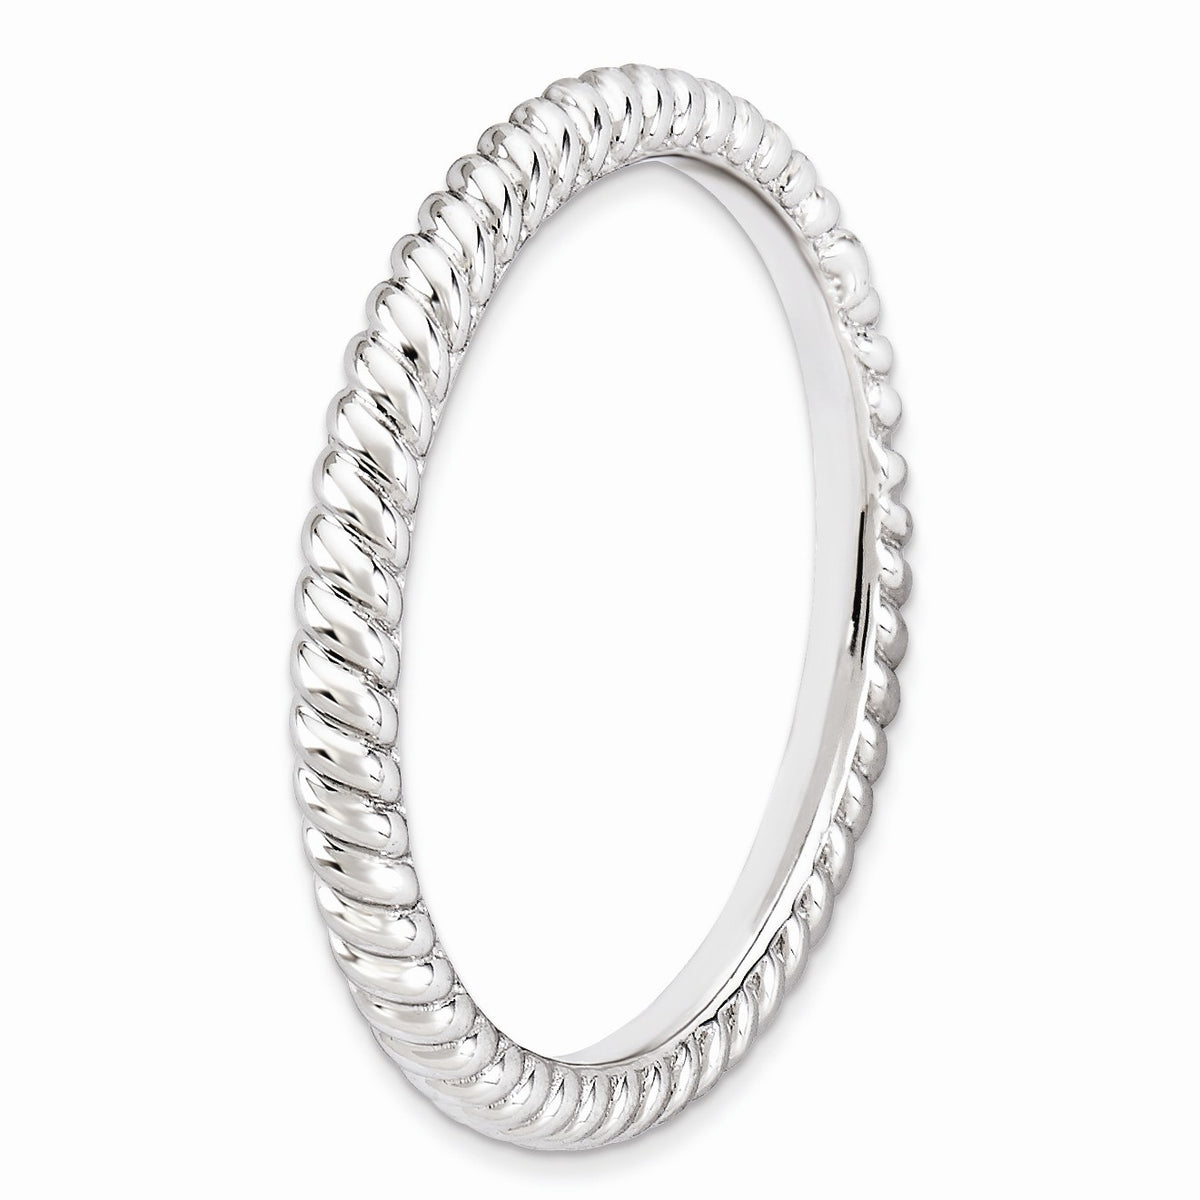 Alternate view of the 2.25mm Rhodium Plated Sterling Silver Stackable Twisted Band by The Black Bow Jewelry Co.